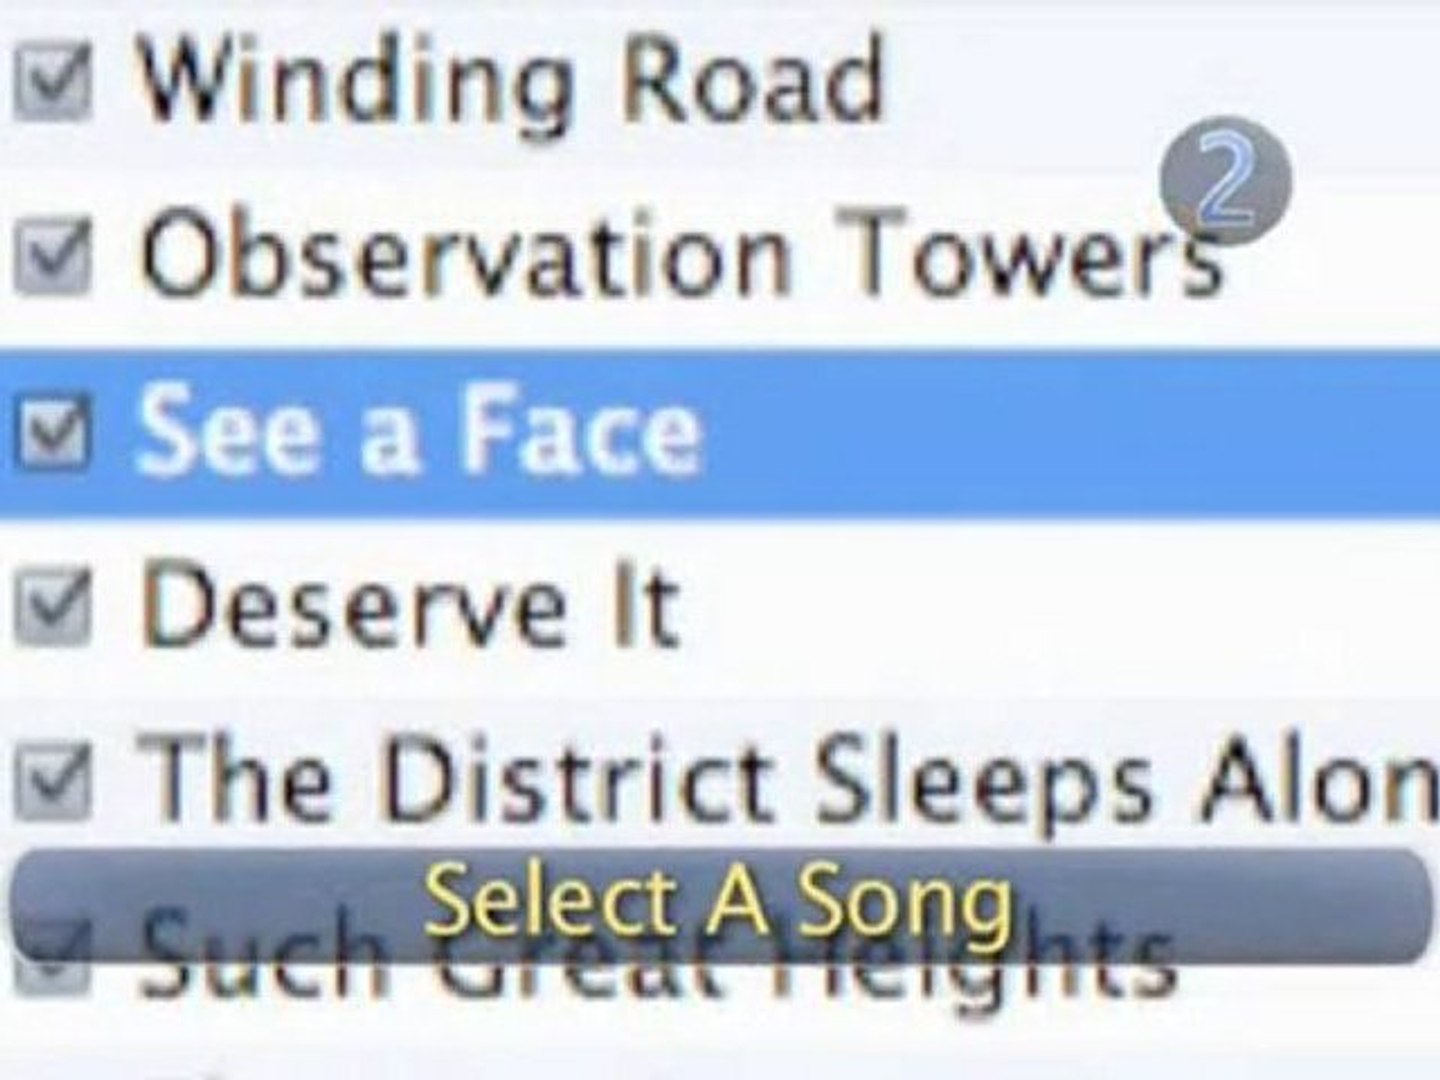 How To Find Out The Number Of Playlists A Song Appears In If You Have A PC